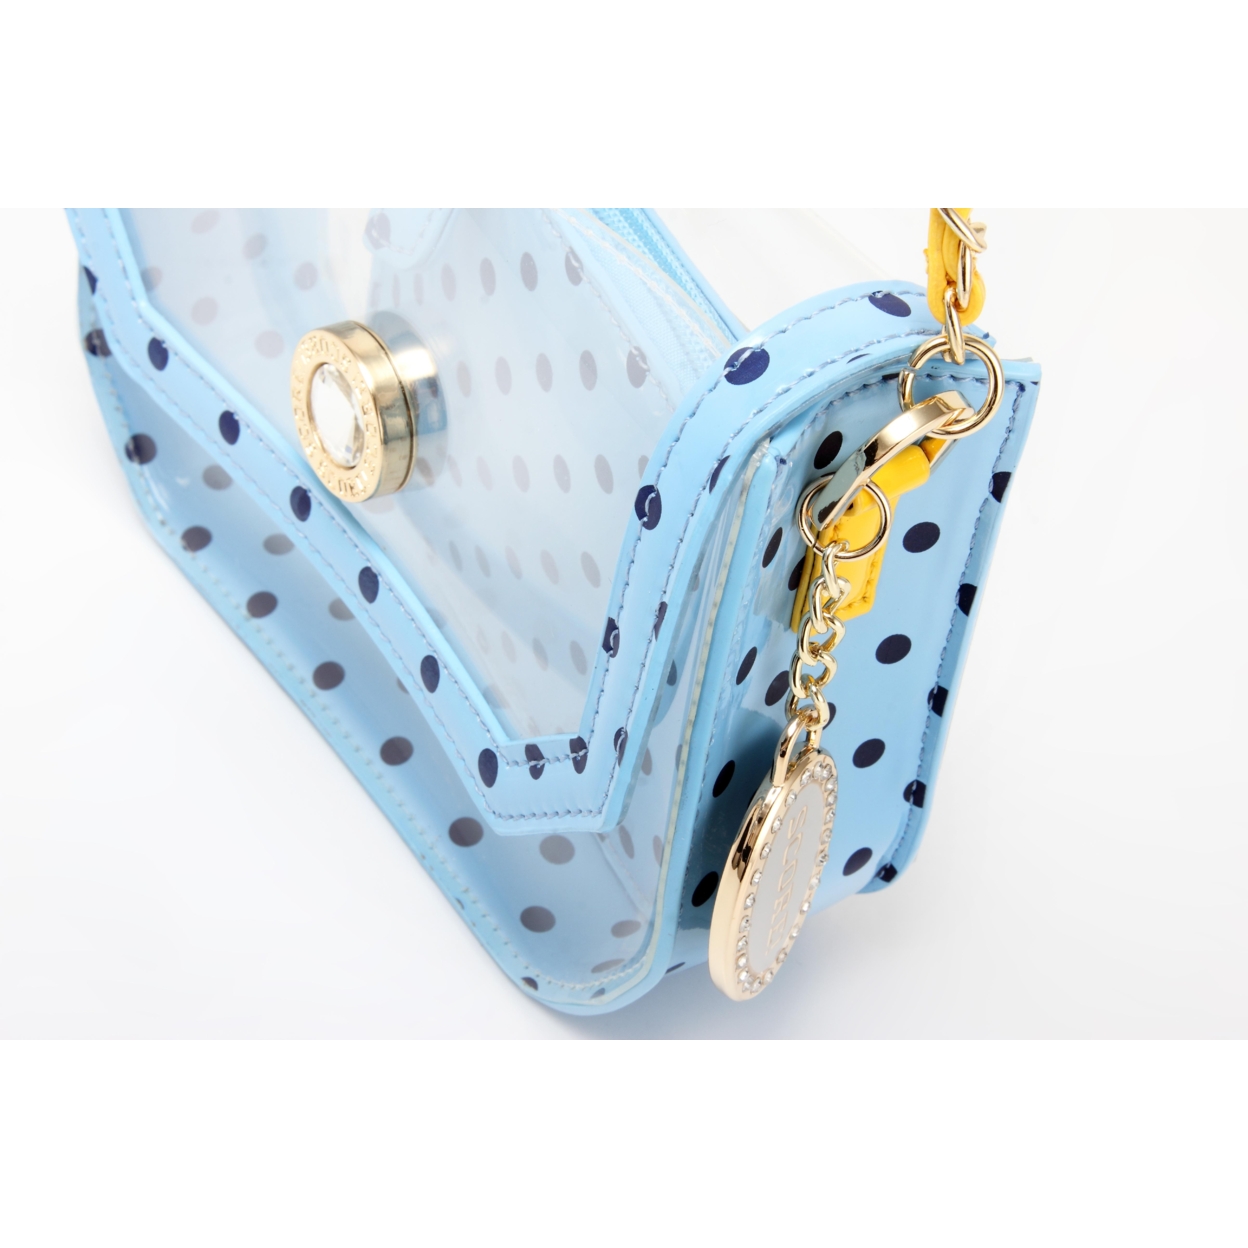 SCORE! Chrissy Small Designer Clear Crossbody Bag - Light Blue, Navy Blue And Yellow Gold